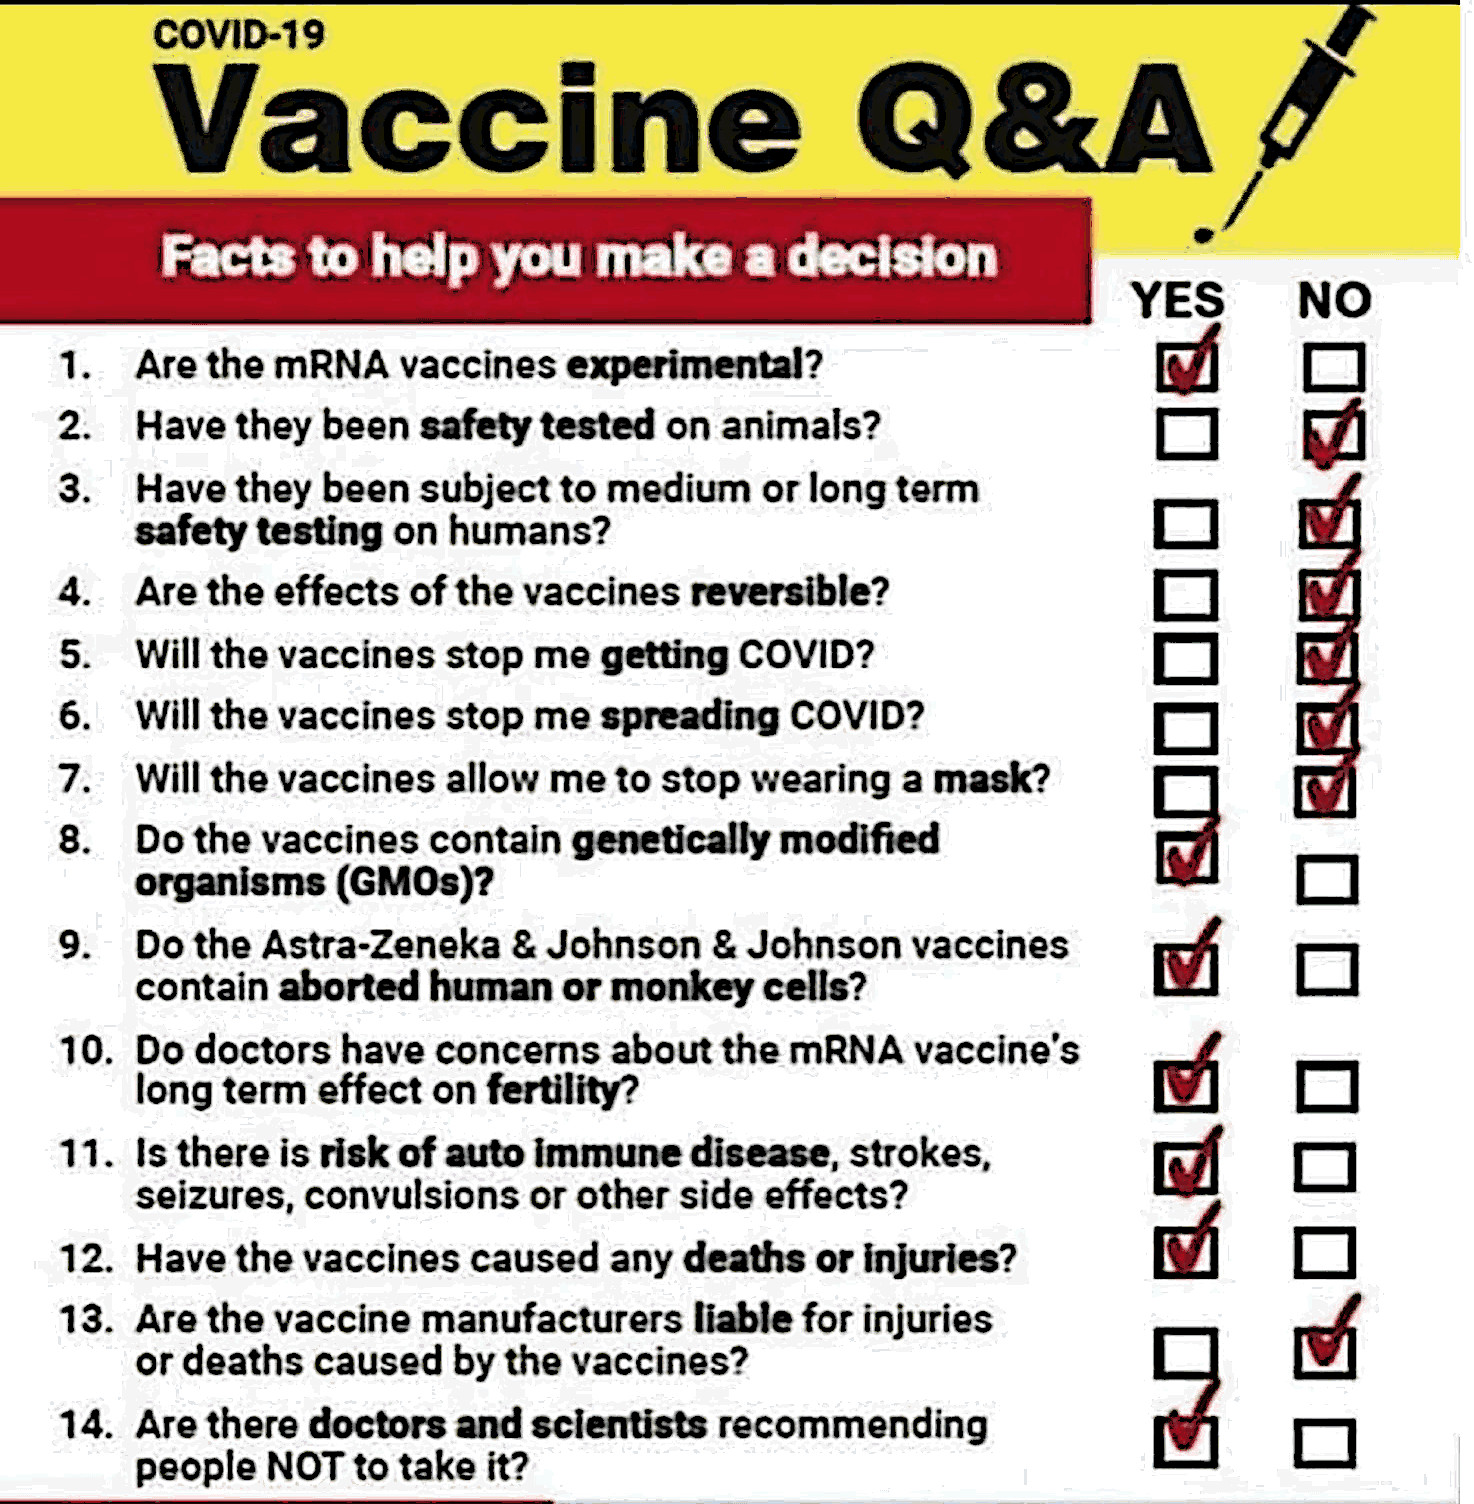 covid-19 corona virus pandemic flu virus vaccine safety effectiveness efficacy questions and answers